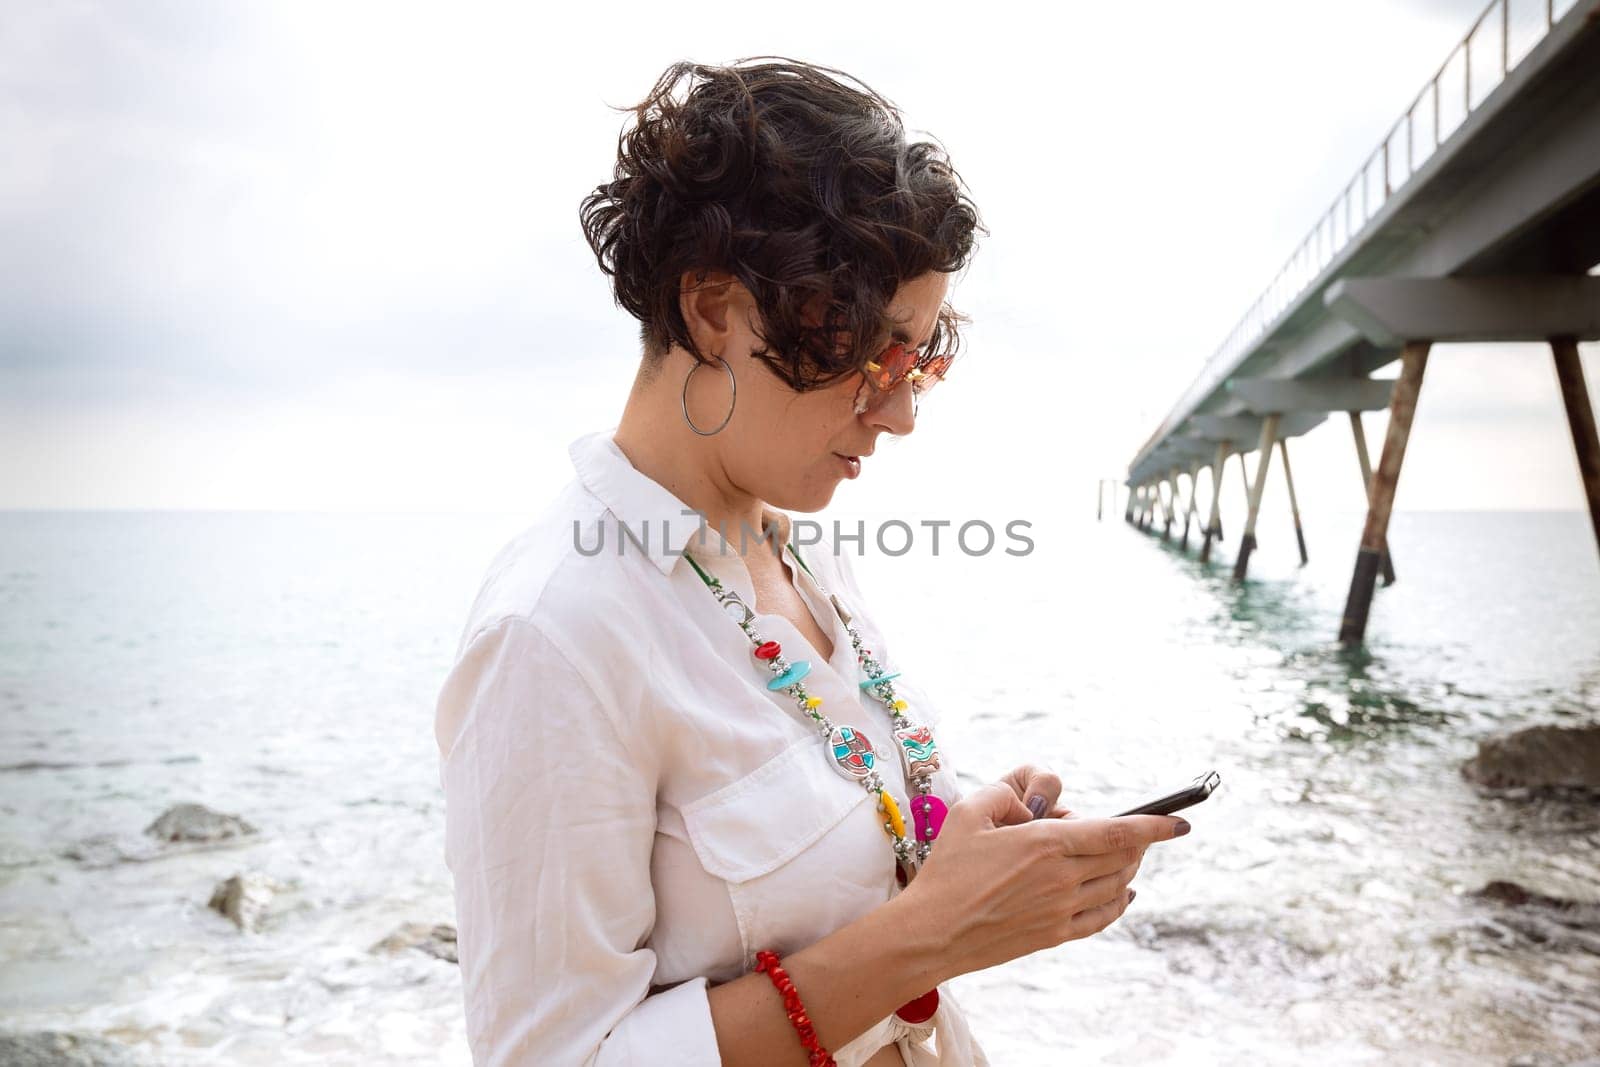 caucasian woman wearing sunglasses on vacation by the sea laughing using a social media app with her mobile phone, holding a caffee.